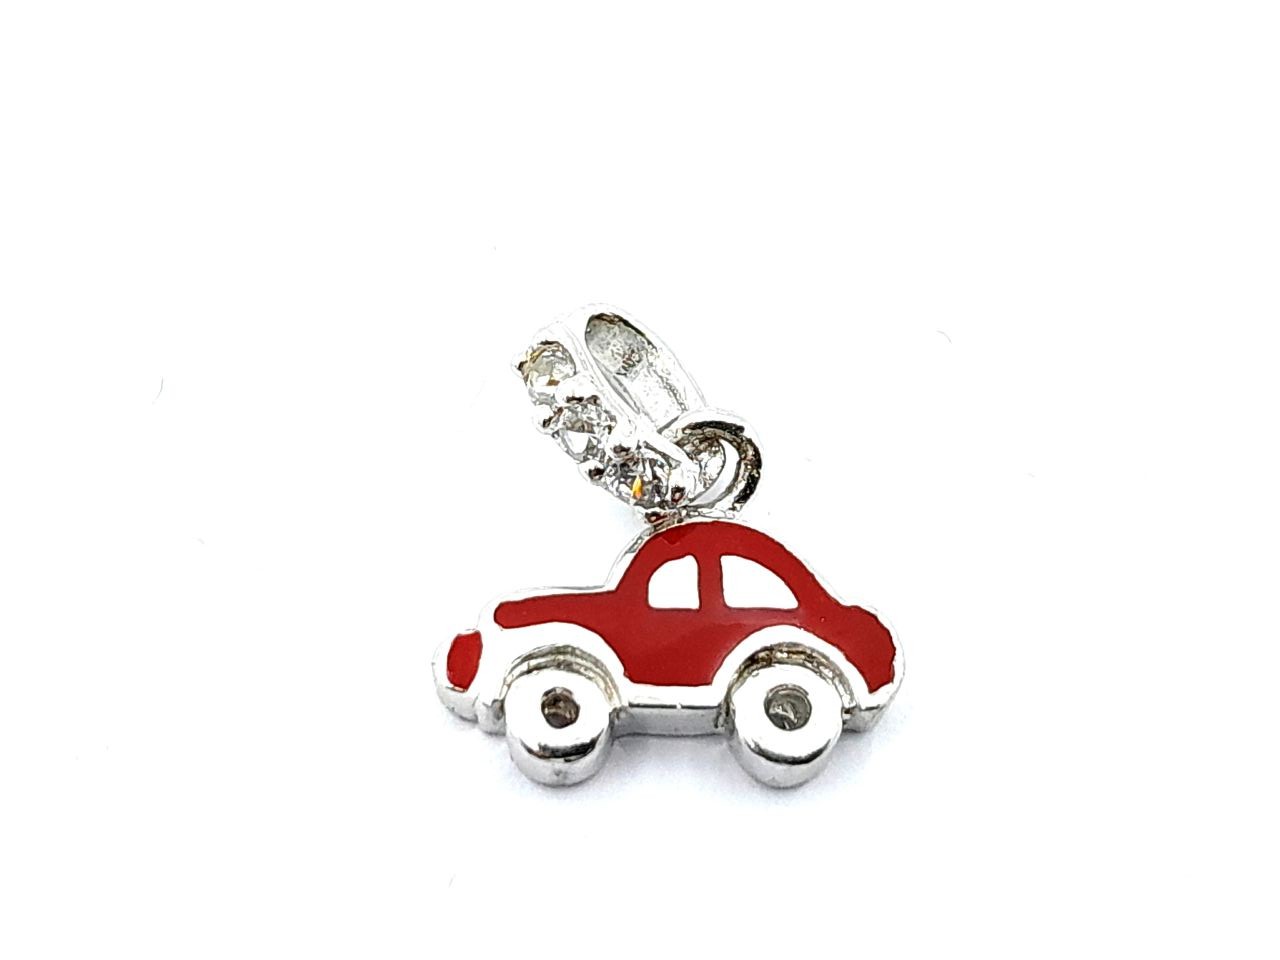 Silver pendant in the shape of a car